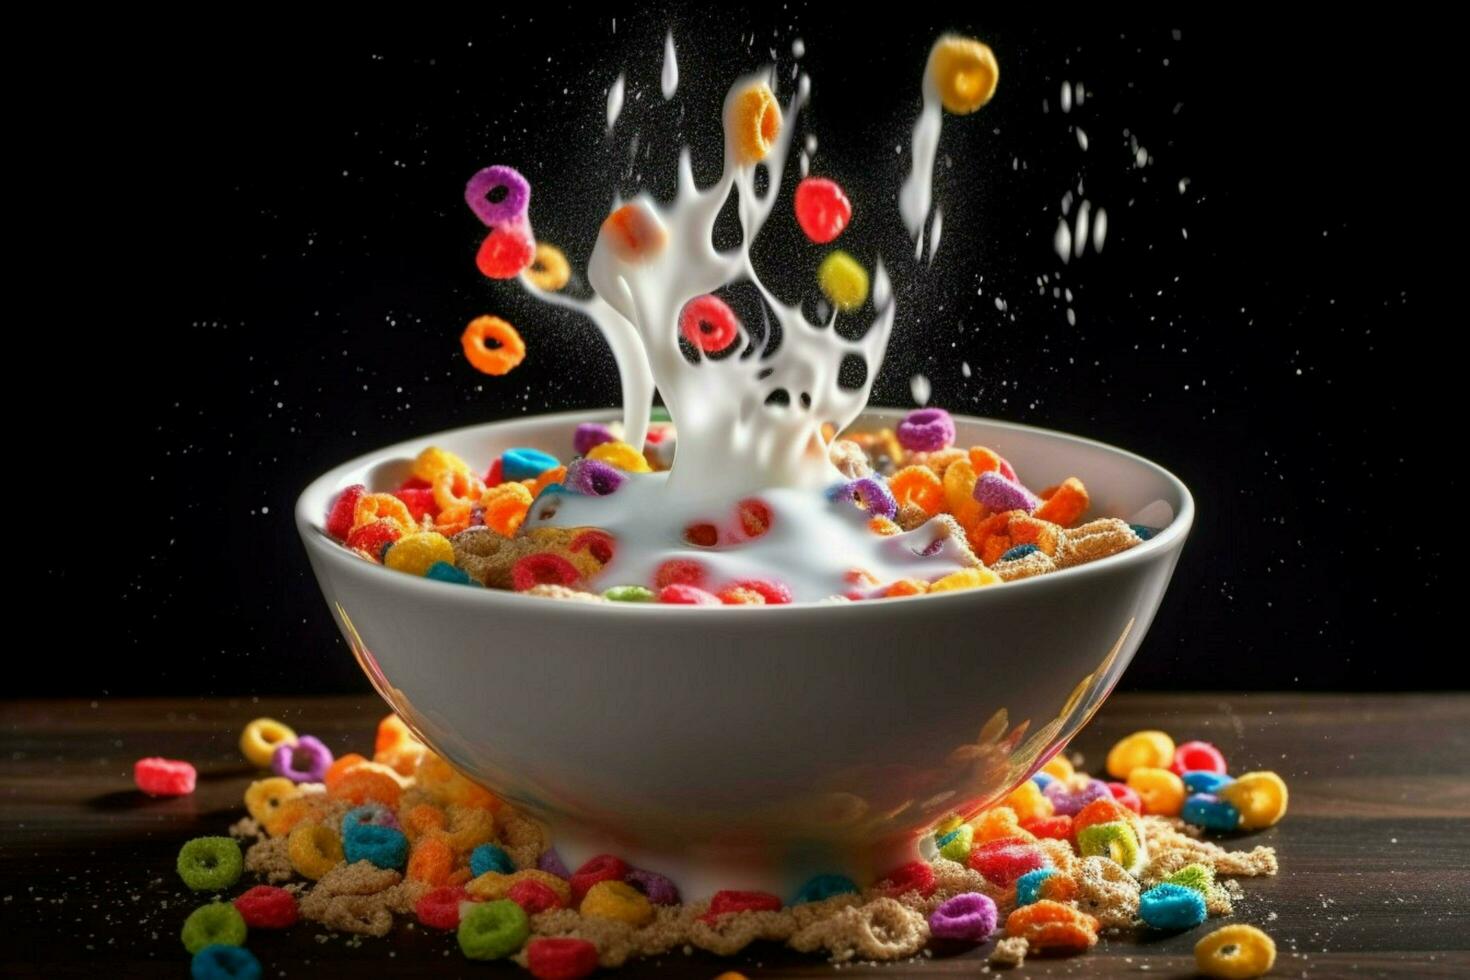 a bowl of cereal with milk and a splash of milk photo